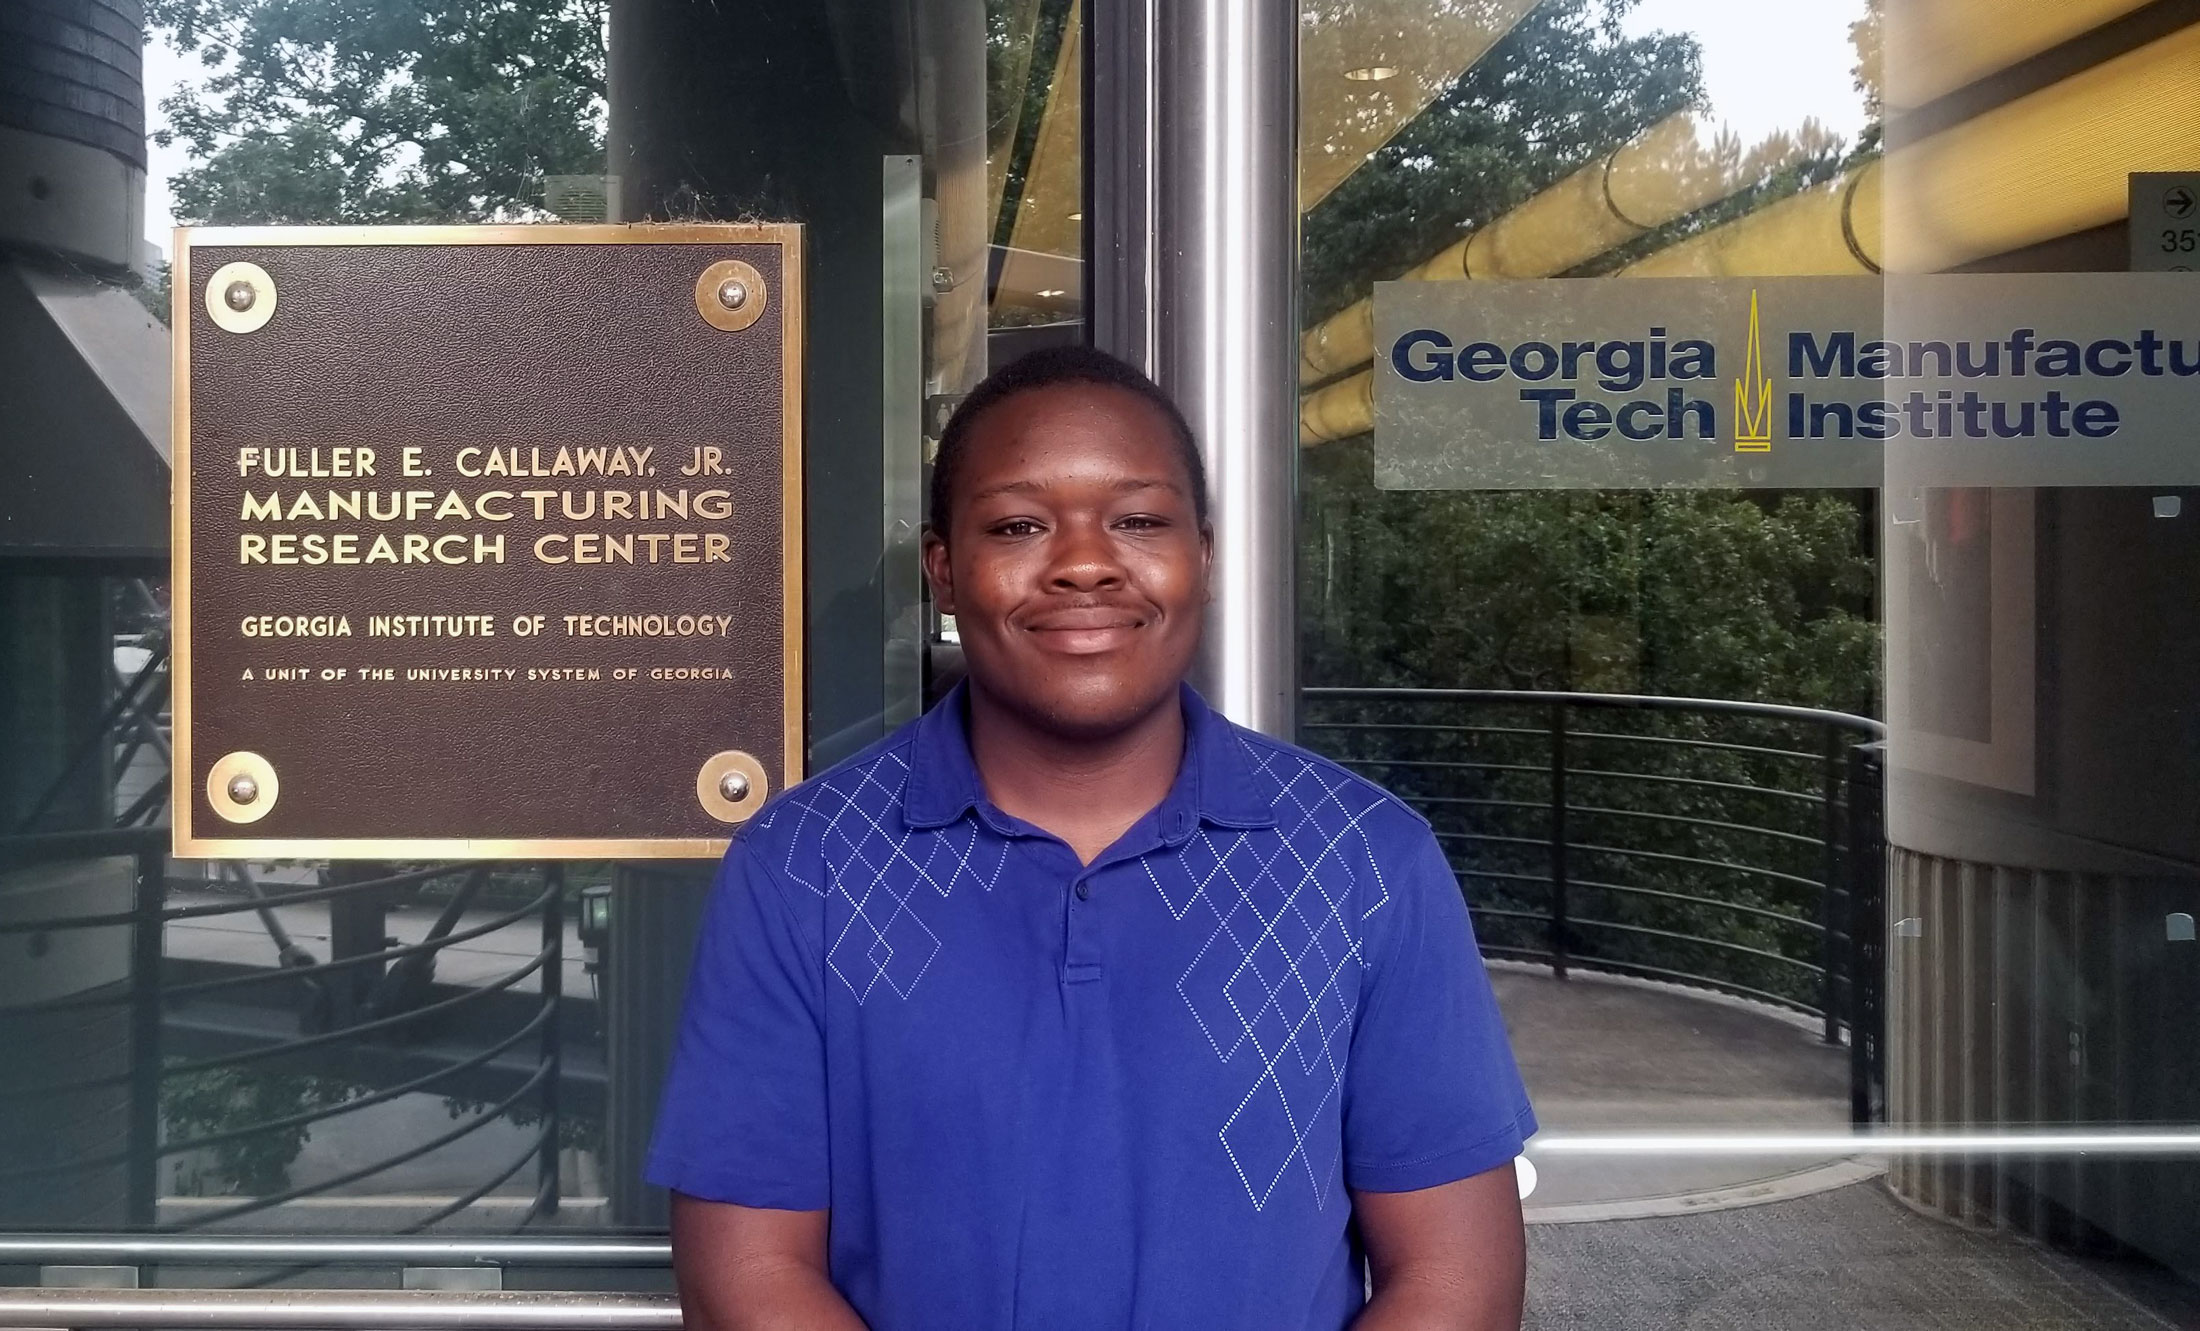 Jabari Acre is completing a National Science Foundation Research Experience for Undergraduates at Georgia Tech Manufacturing.